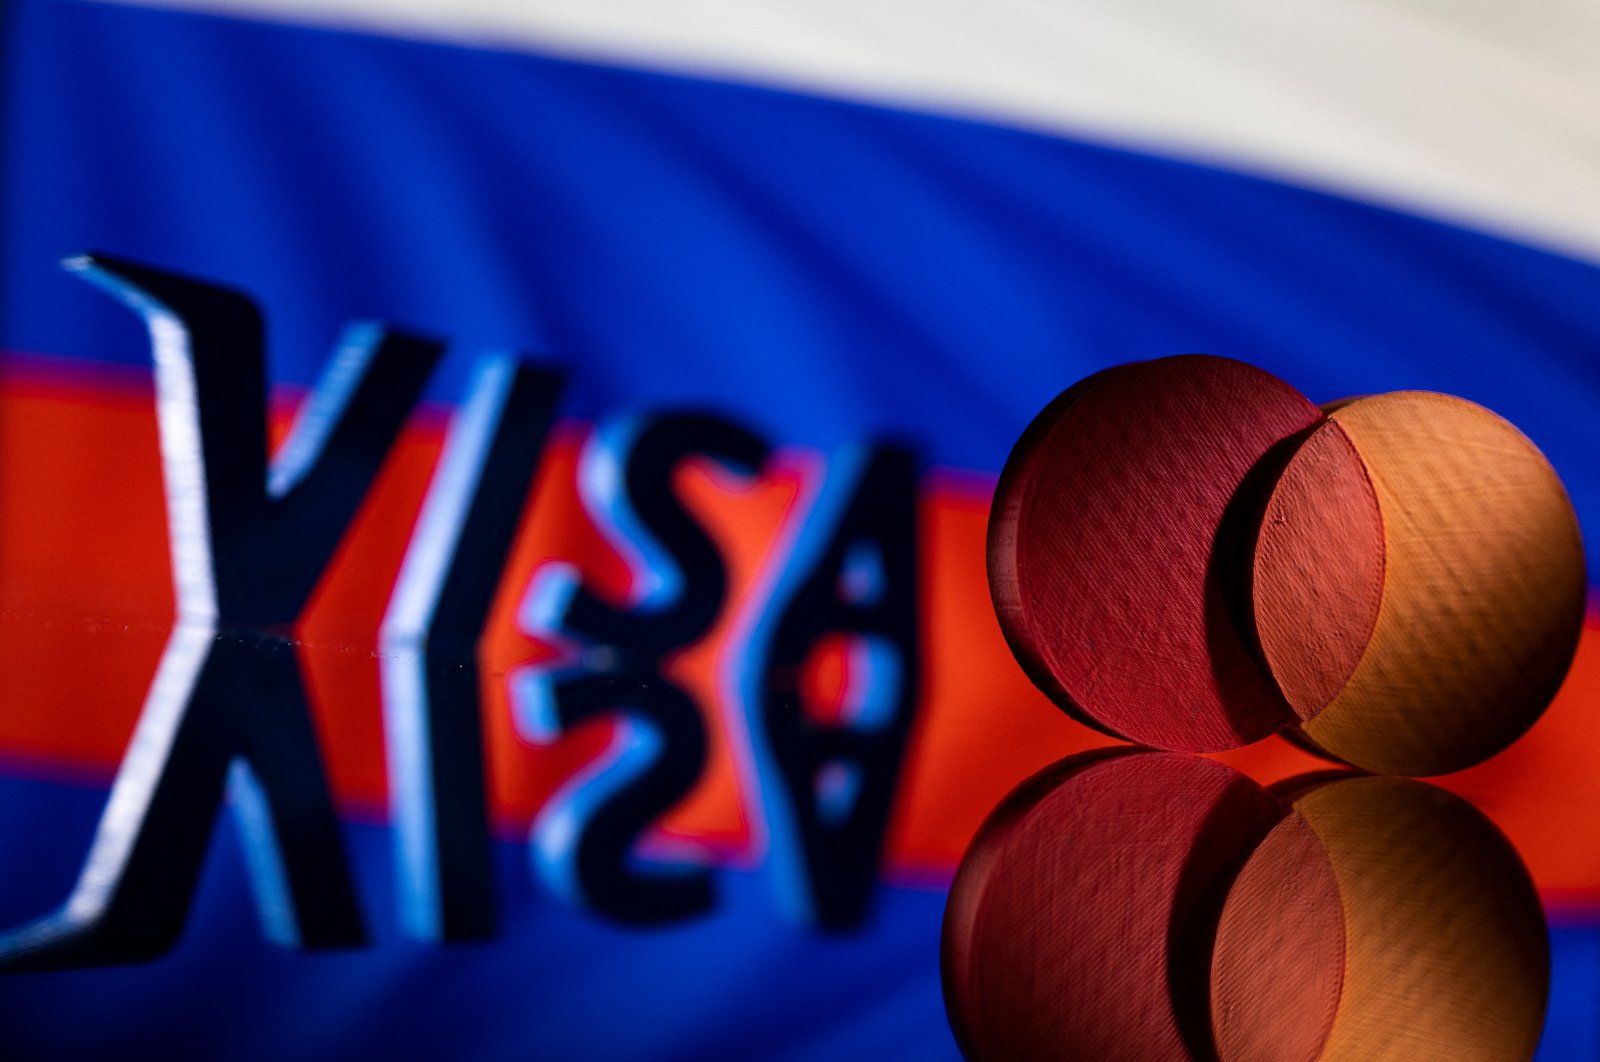 Visa and Mastercard logos are seen in front of Russian flag in this illustration taken March 1, 2022. (Reuters Photo)